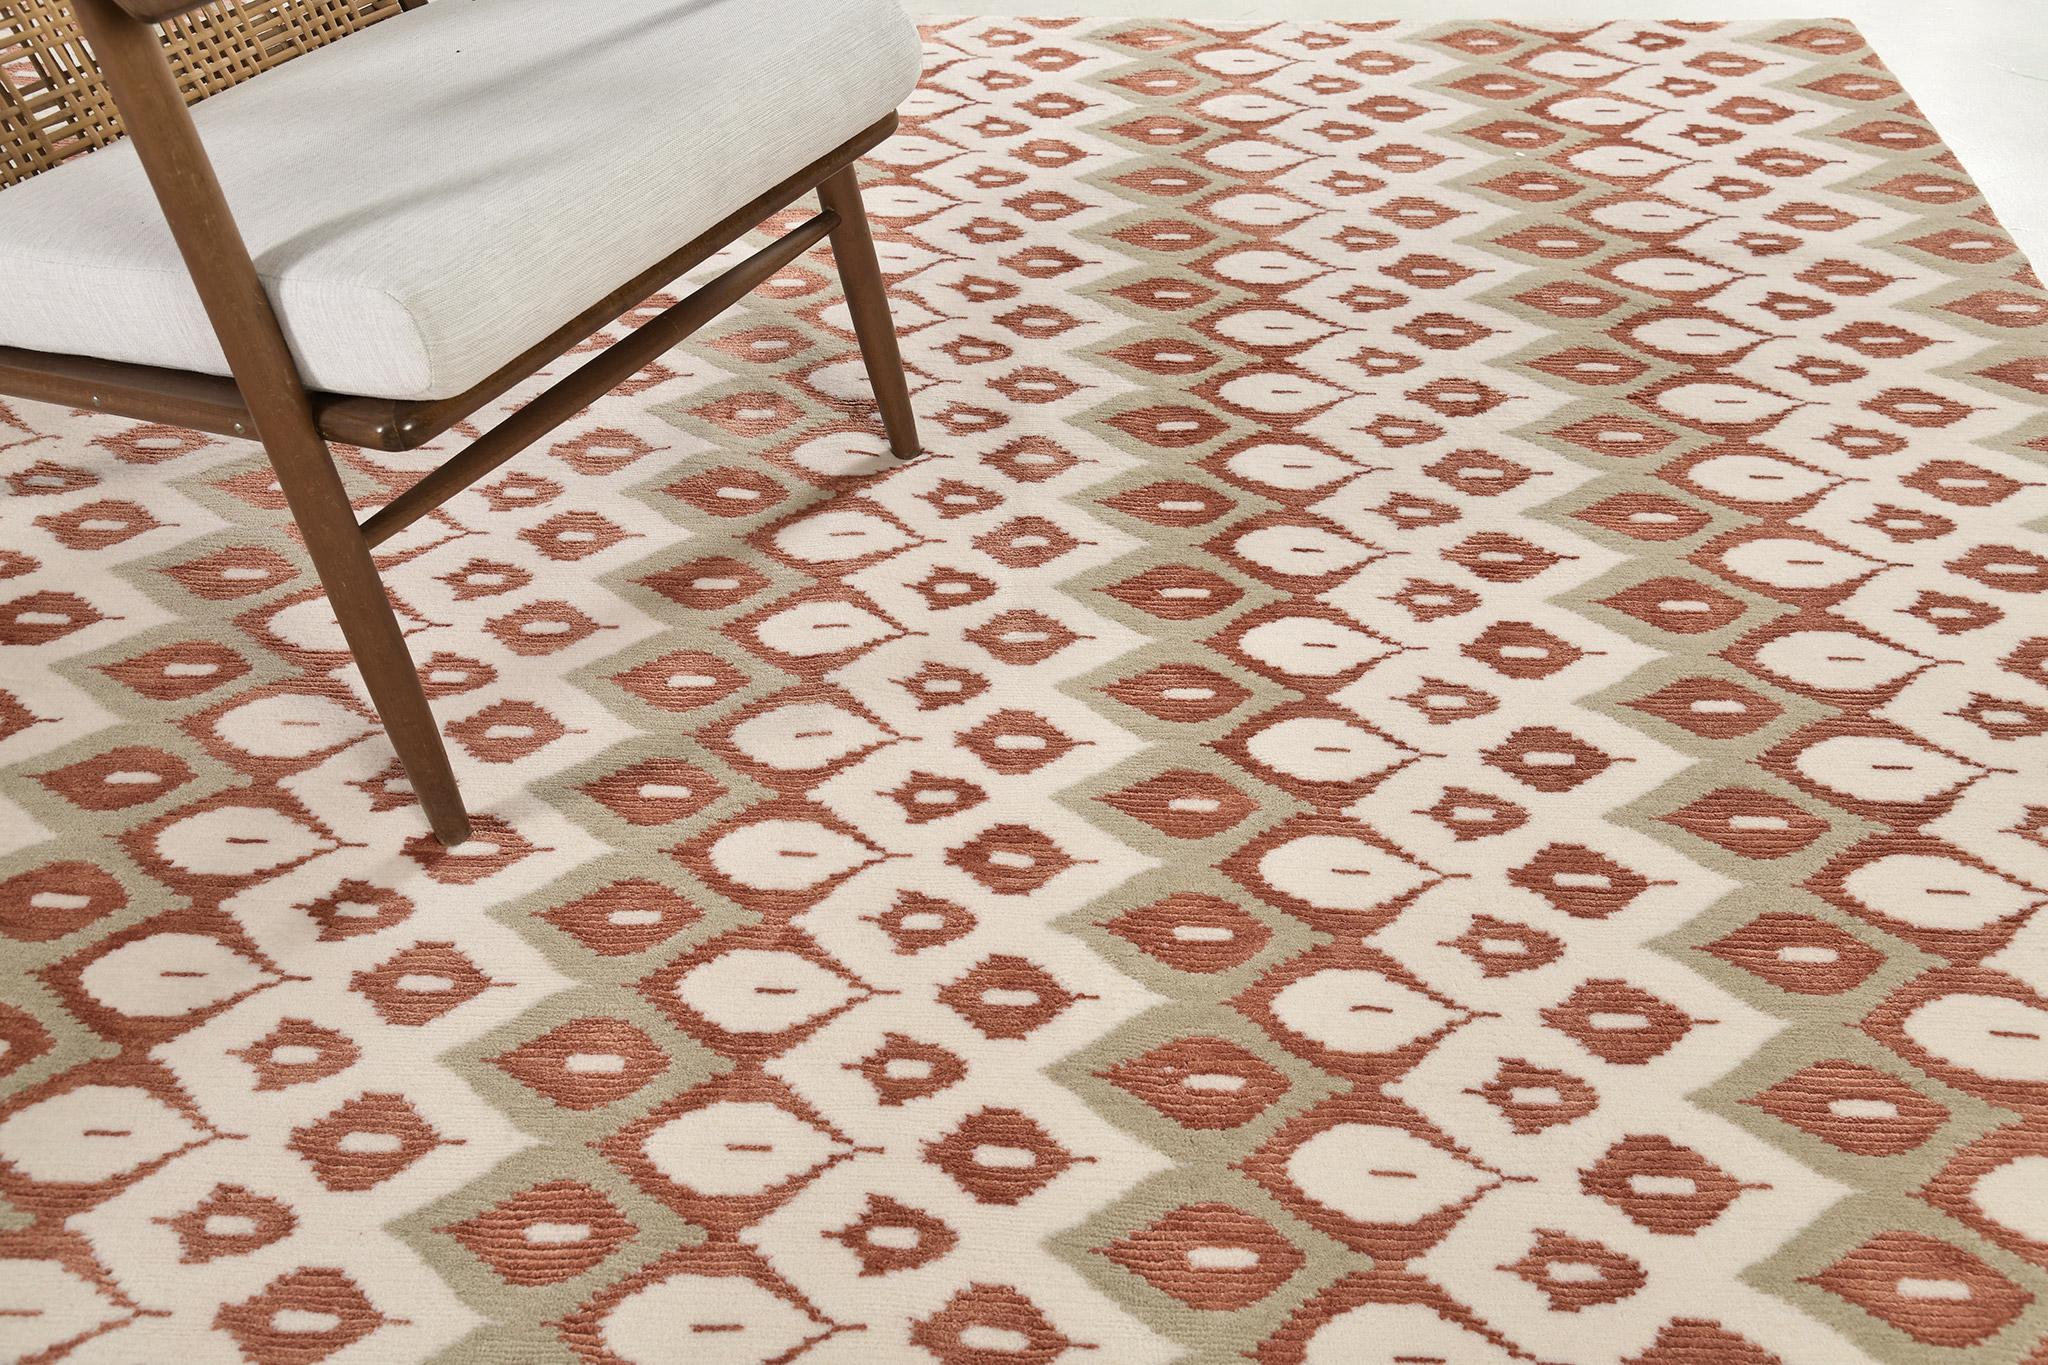 Candela is a wool and silk pile that comes from the home of the infamous Allure Collection. Color schemes are the clay, khaki, and white and these transitional patterns will give an extra edge to its ethereal entrance that will give impressive